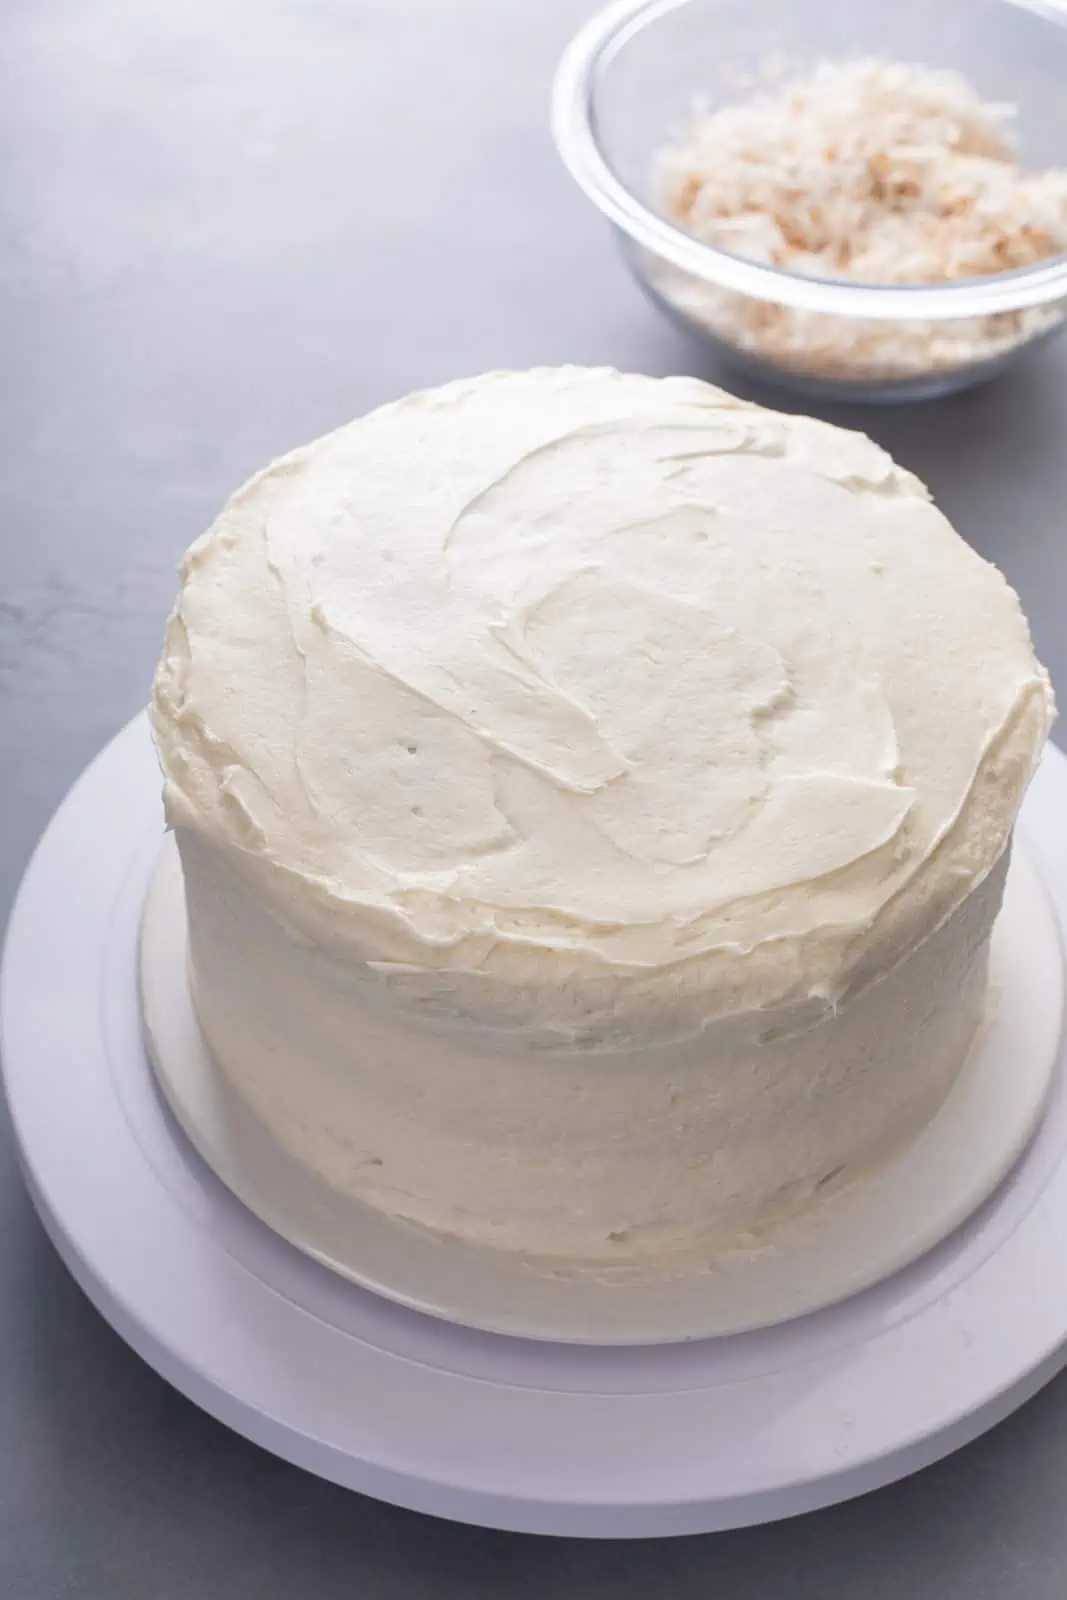 Coconut cake covered in white frosting.